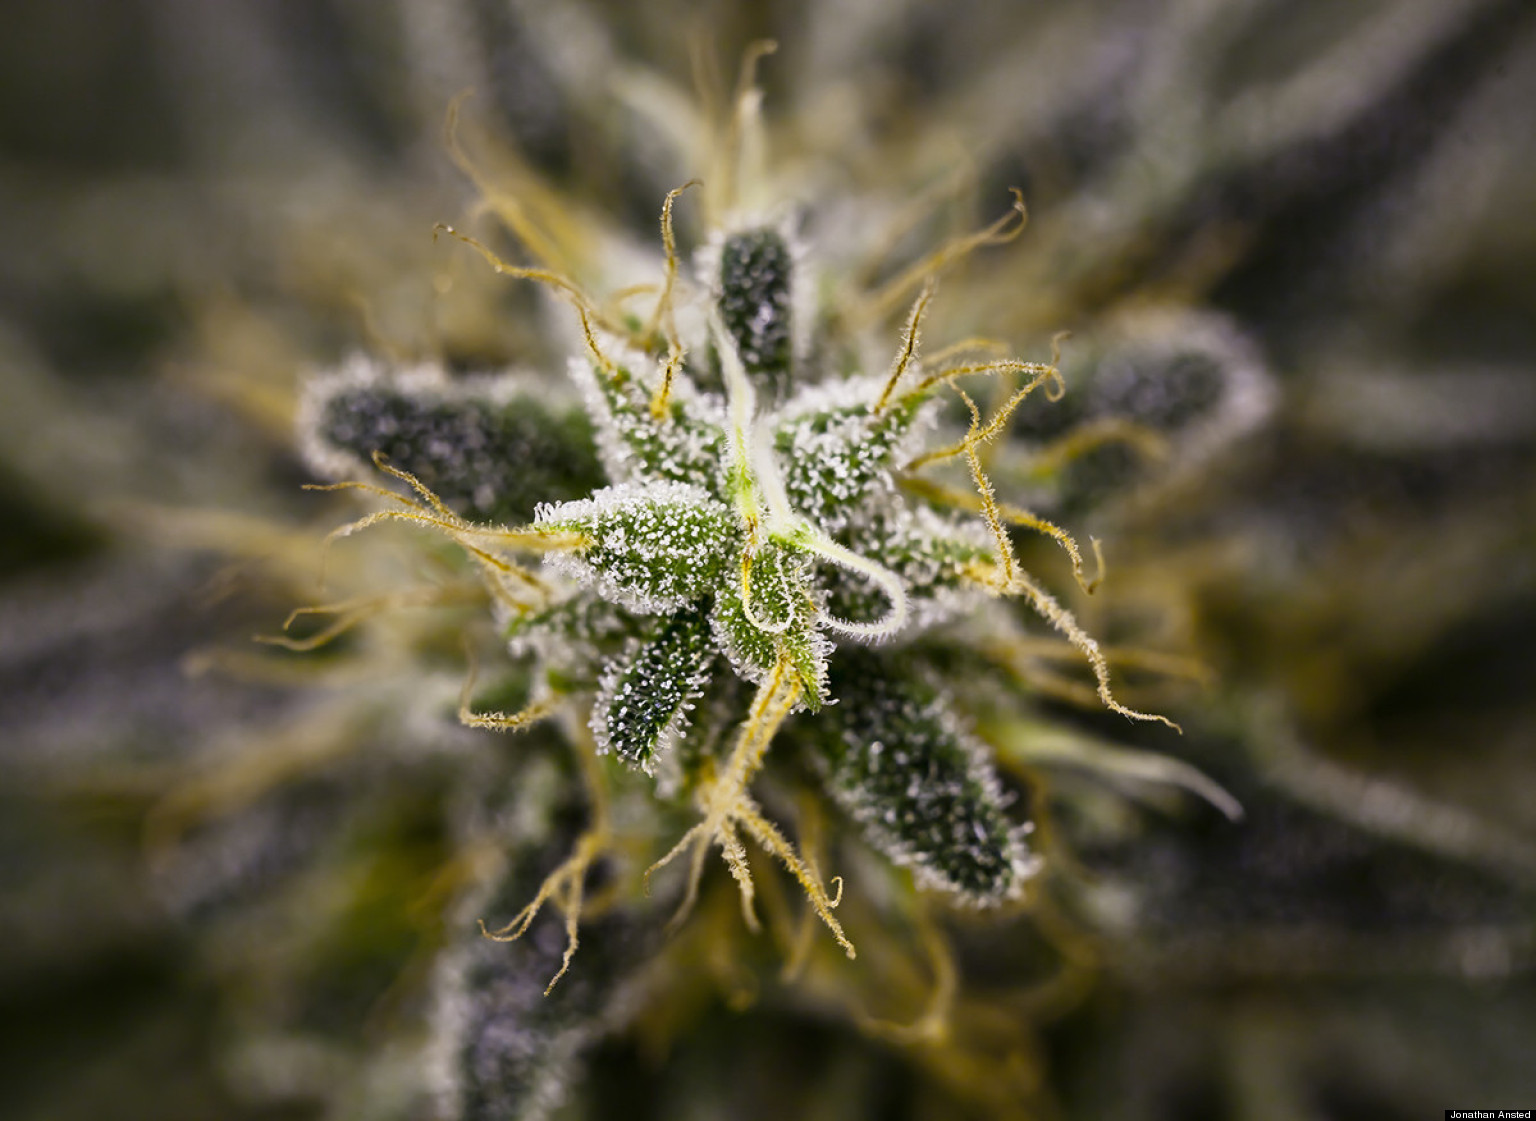 Marijuana Porn: Check Out These Gorgeous Shots Of Weed, Man (PHOTOS